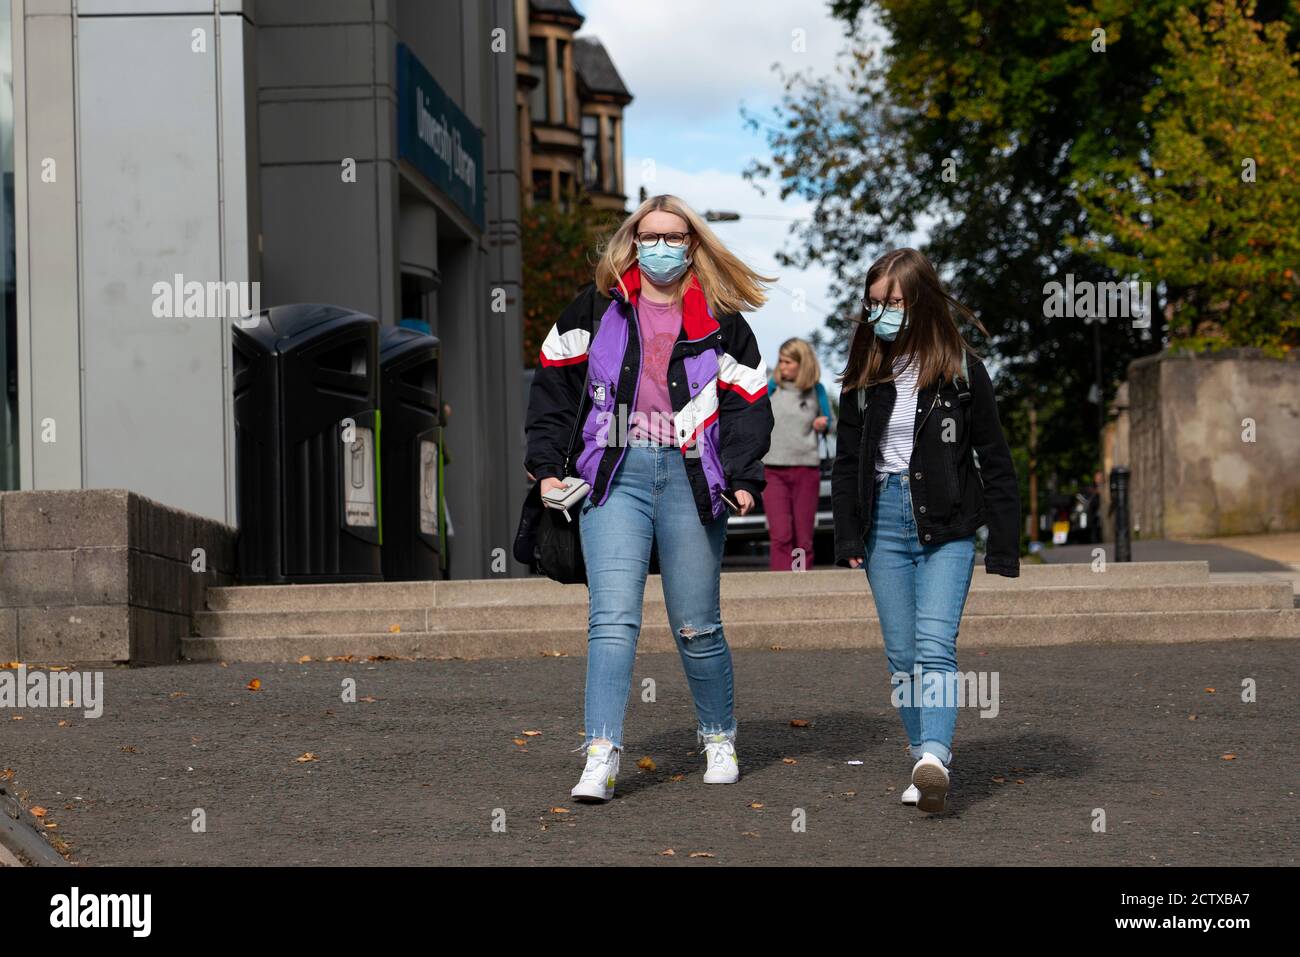 Glasgow, Scotland, UK. 25 September, 2020. Many students at Glasgow University have tested positive for the Covid-19 virus. The Scottish Government has controversially ordered students in several halls of residence where positive cases have spiked, to self-isolate indefinitely. Pictured;  Students wearing facemasks on campus. Iain Masterton/Alamy Live News Stock Photo